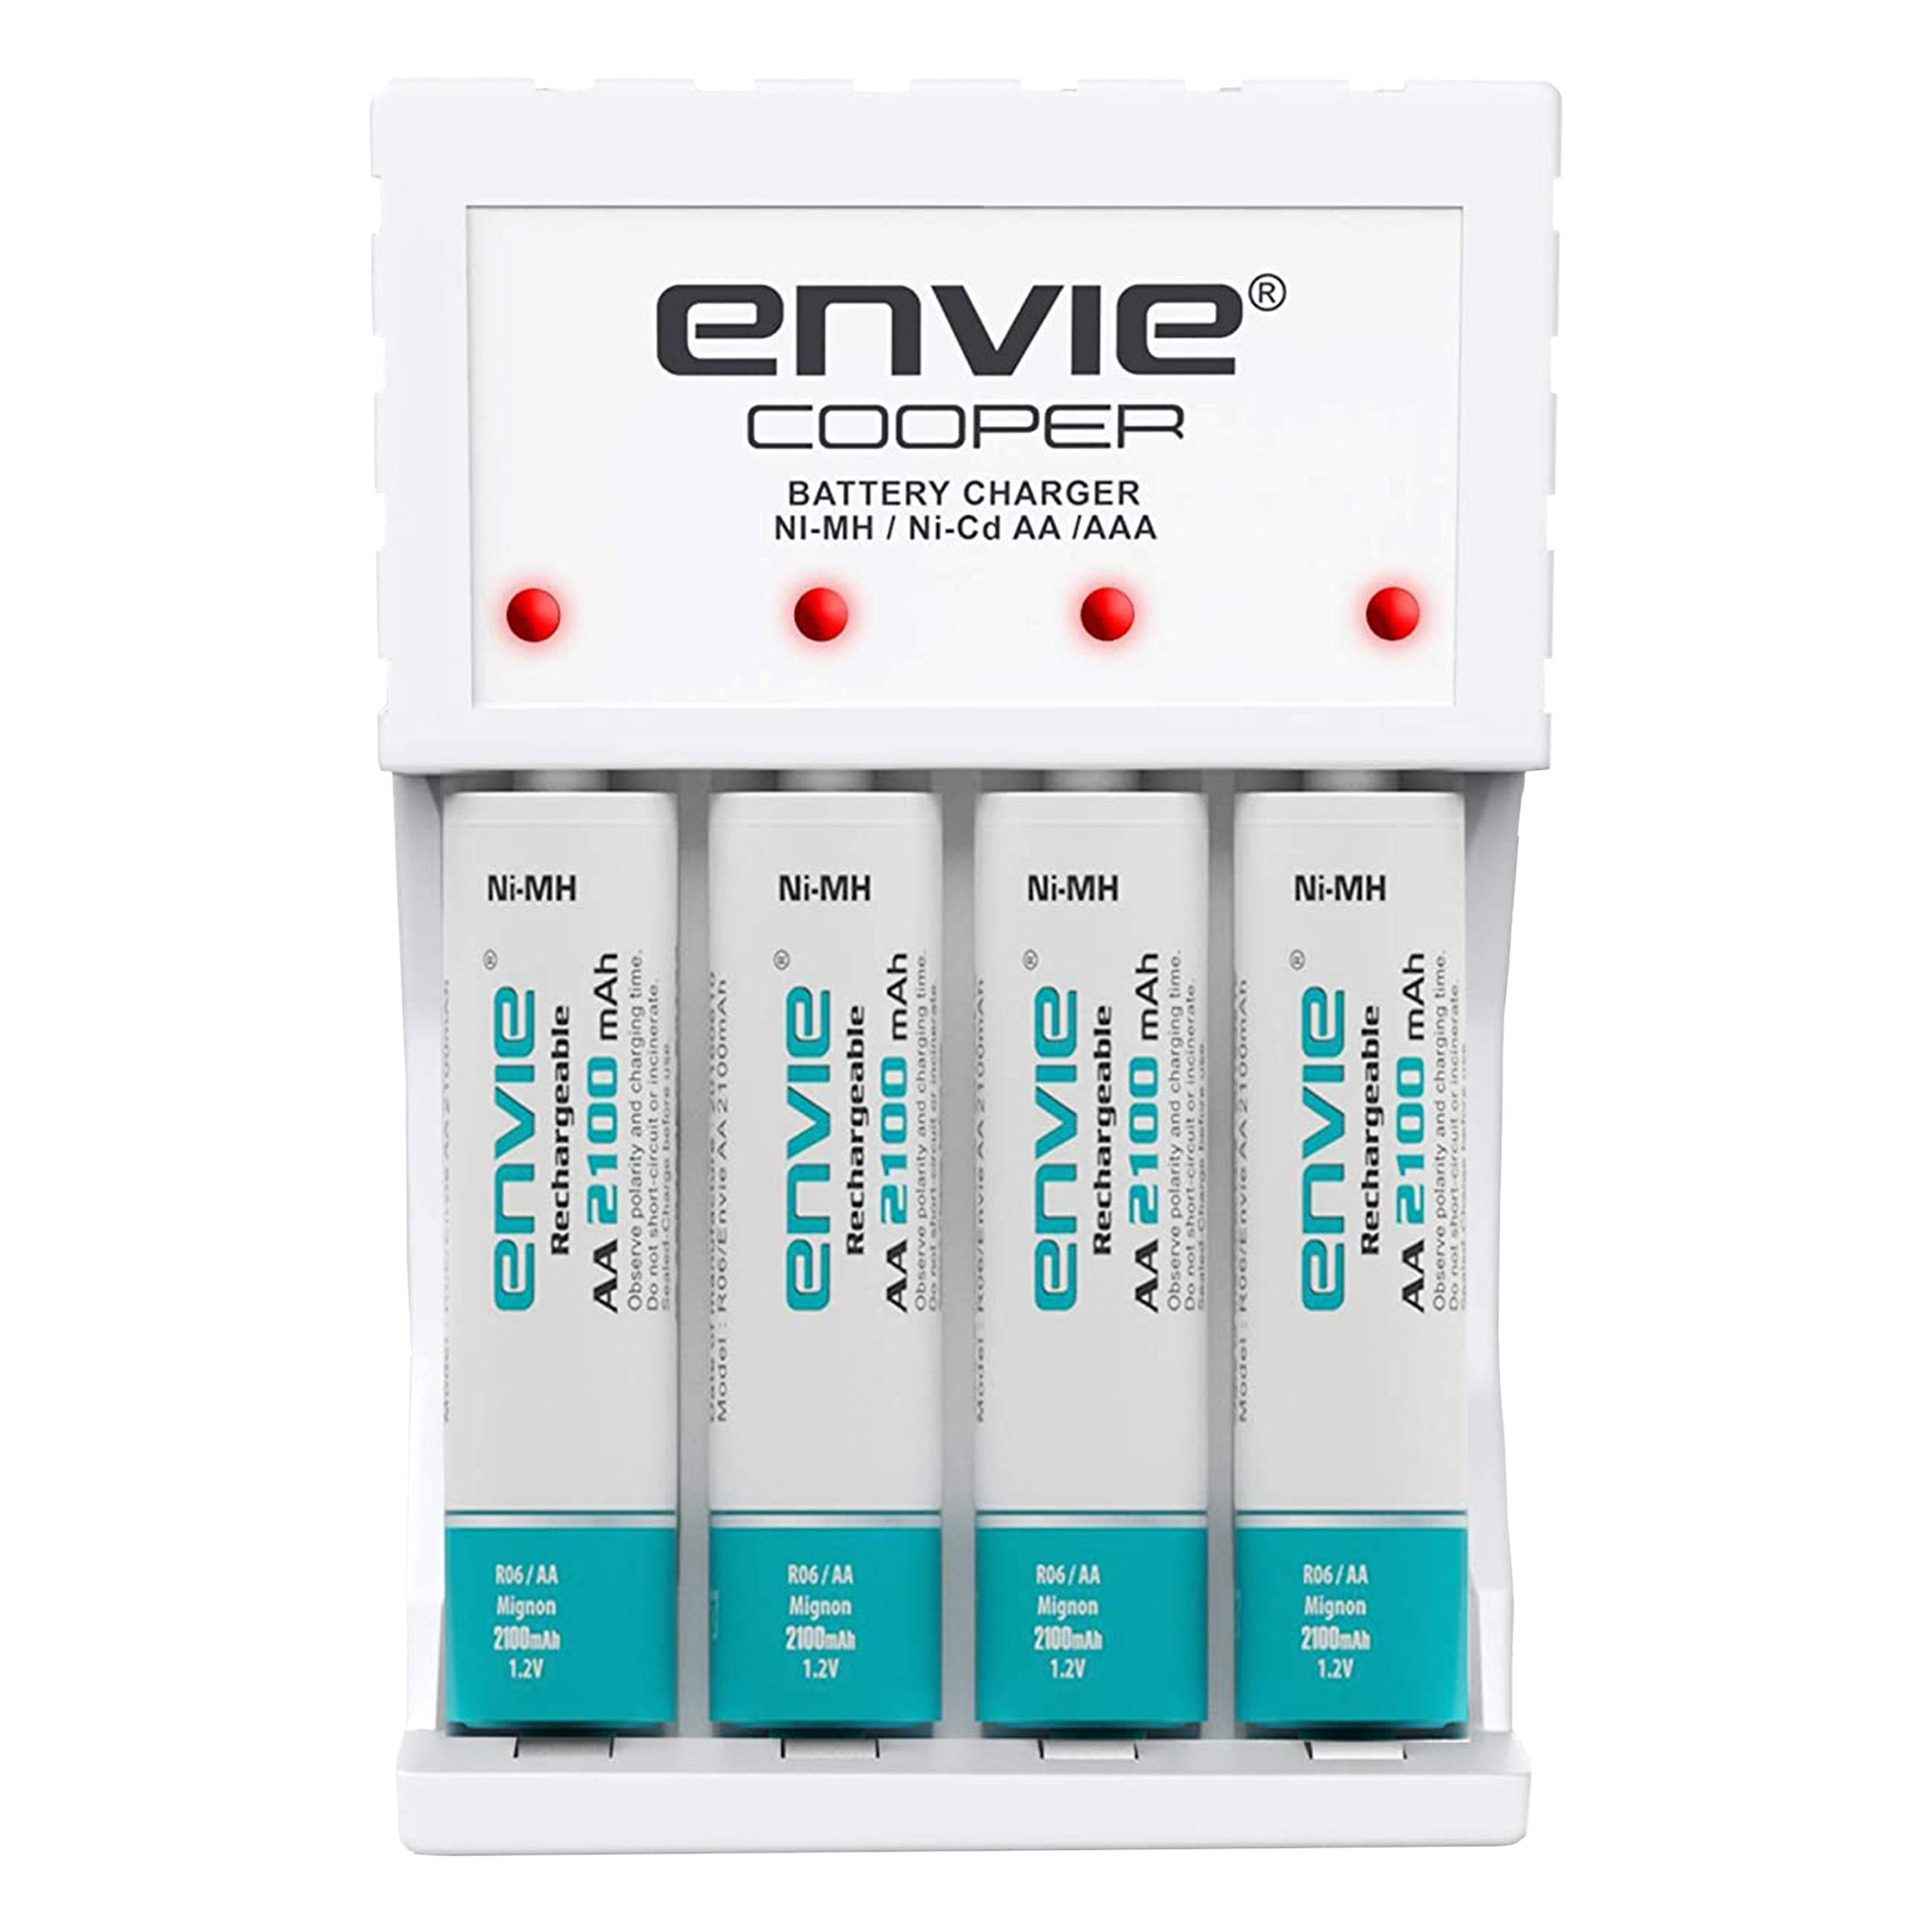 envie Cooper ECR-20 MC Camera Battery Charger Combo for AA2100 (4-Ports, Short Circuit Protection)